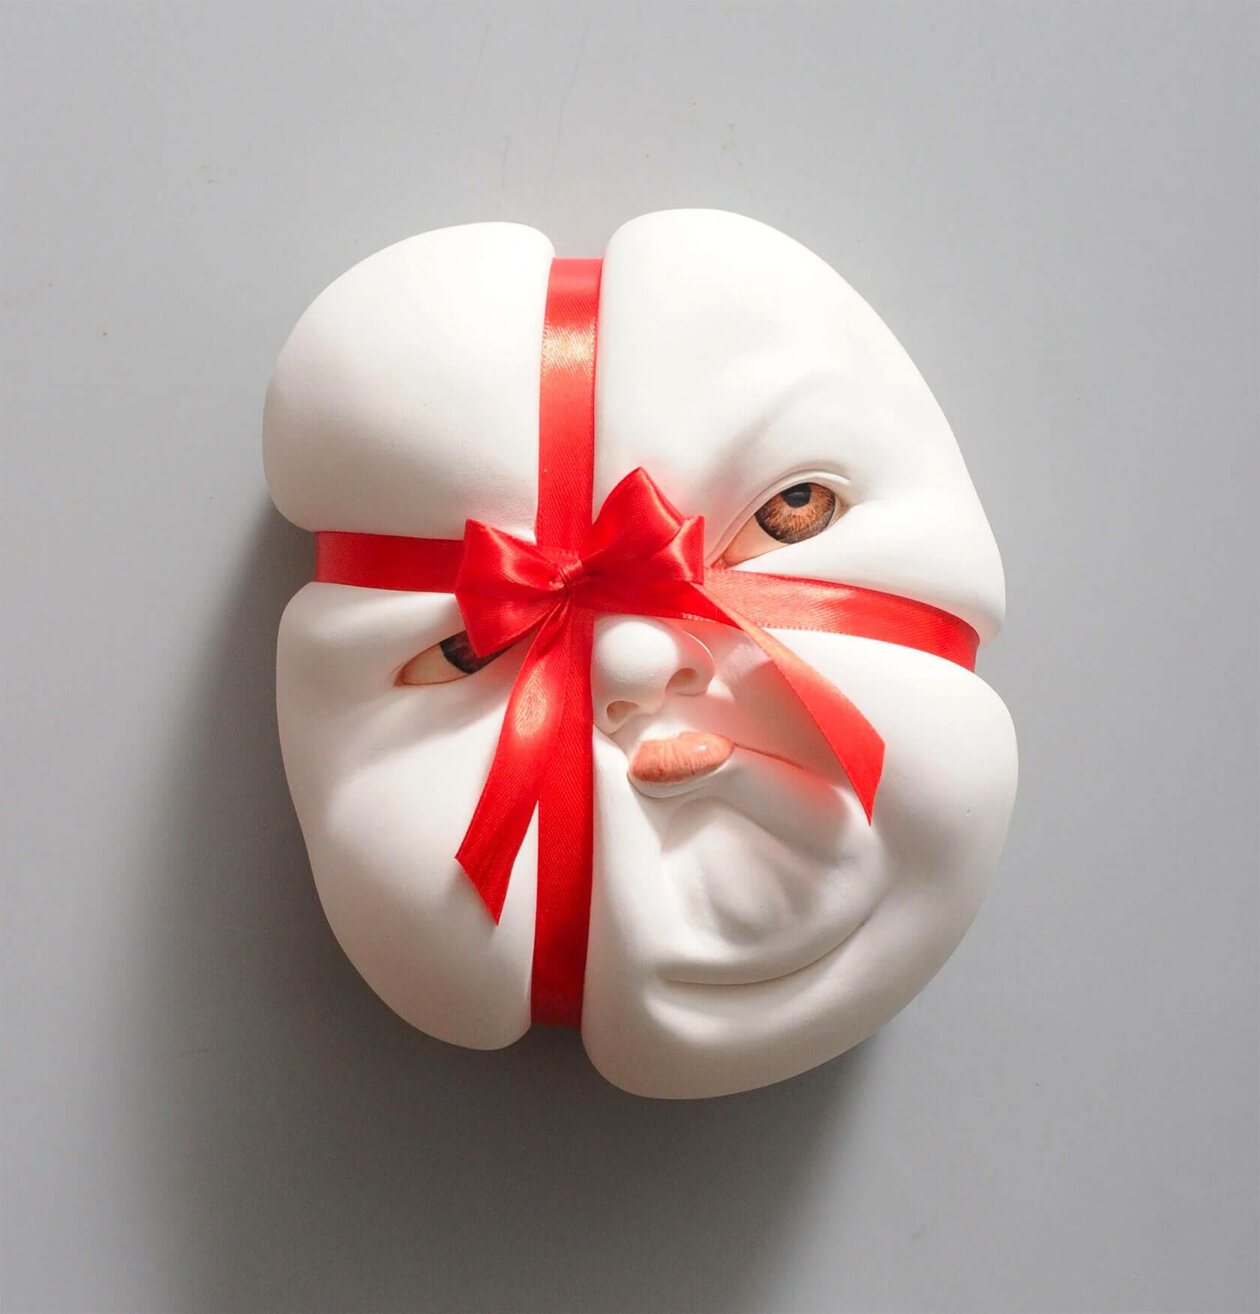 Distorted Baby Faces, Surreal Ceramic Sculptures By Johnson Tsang (16)